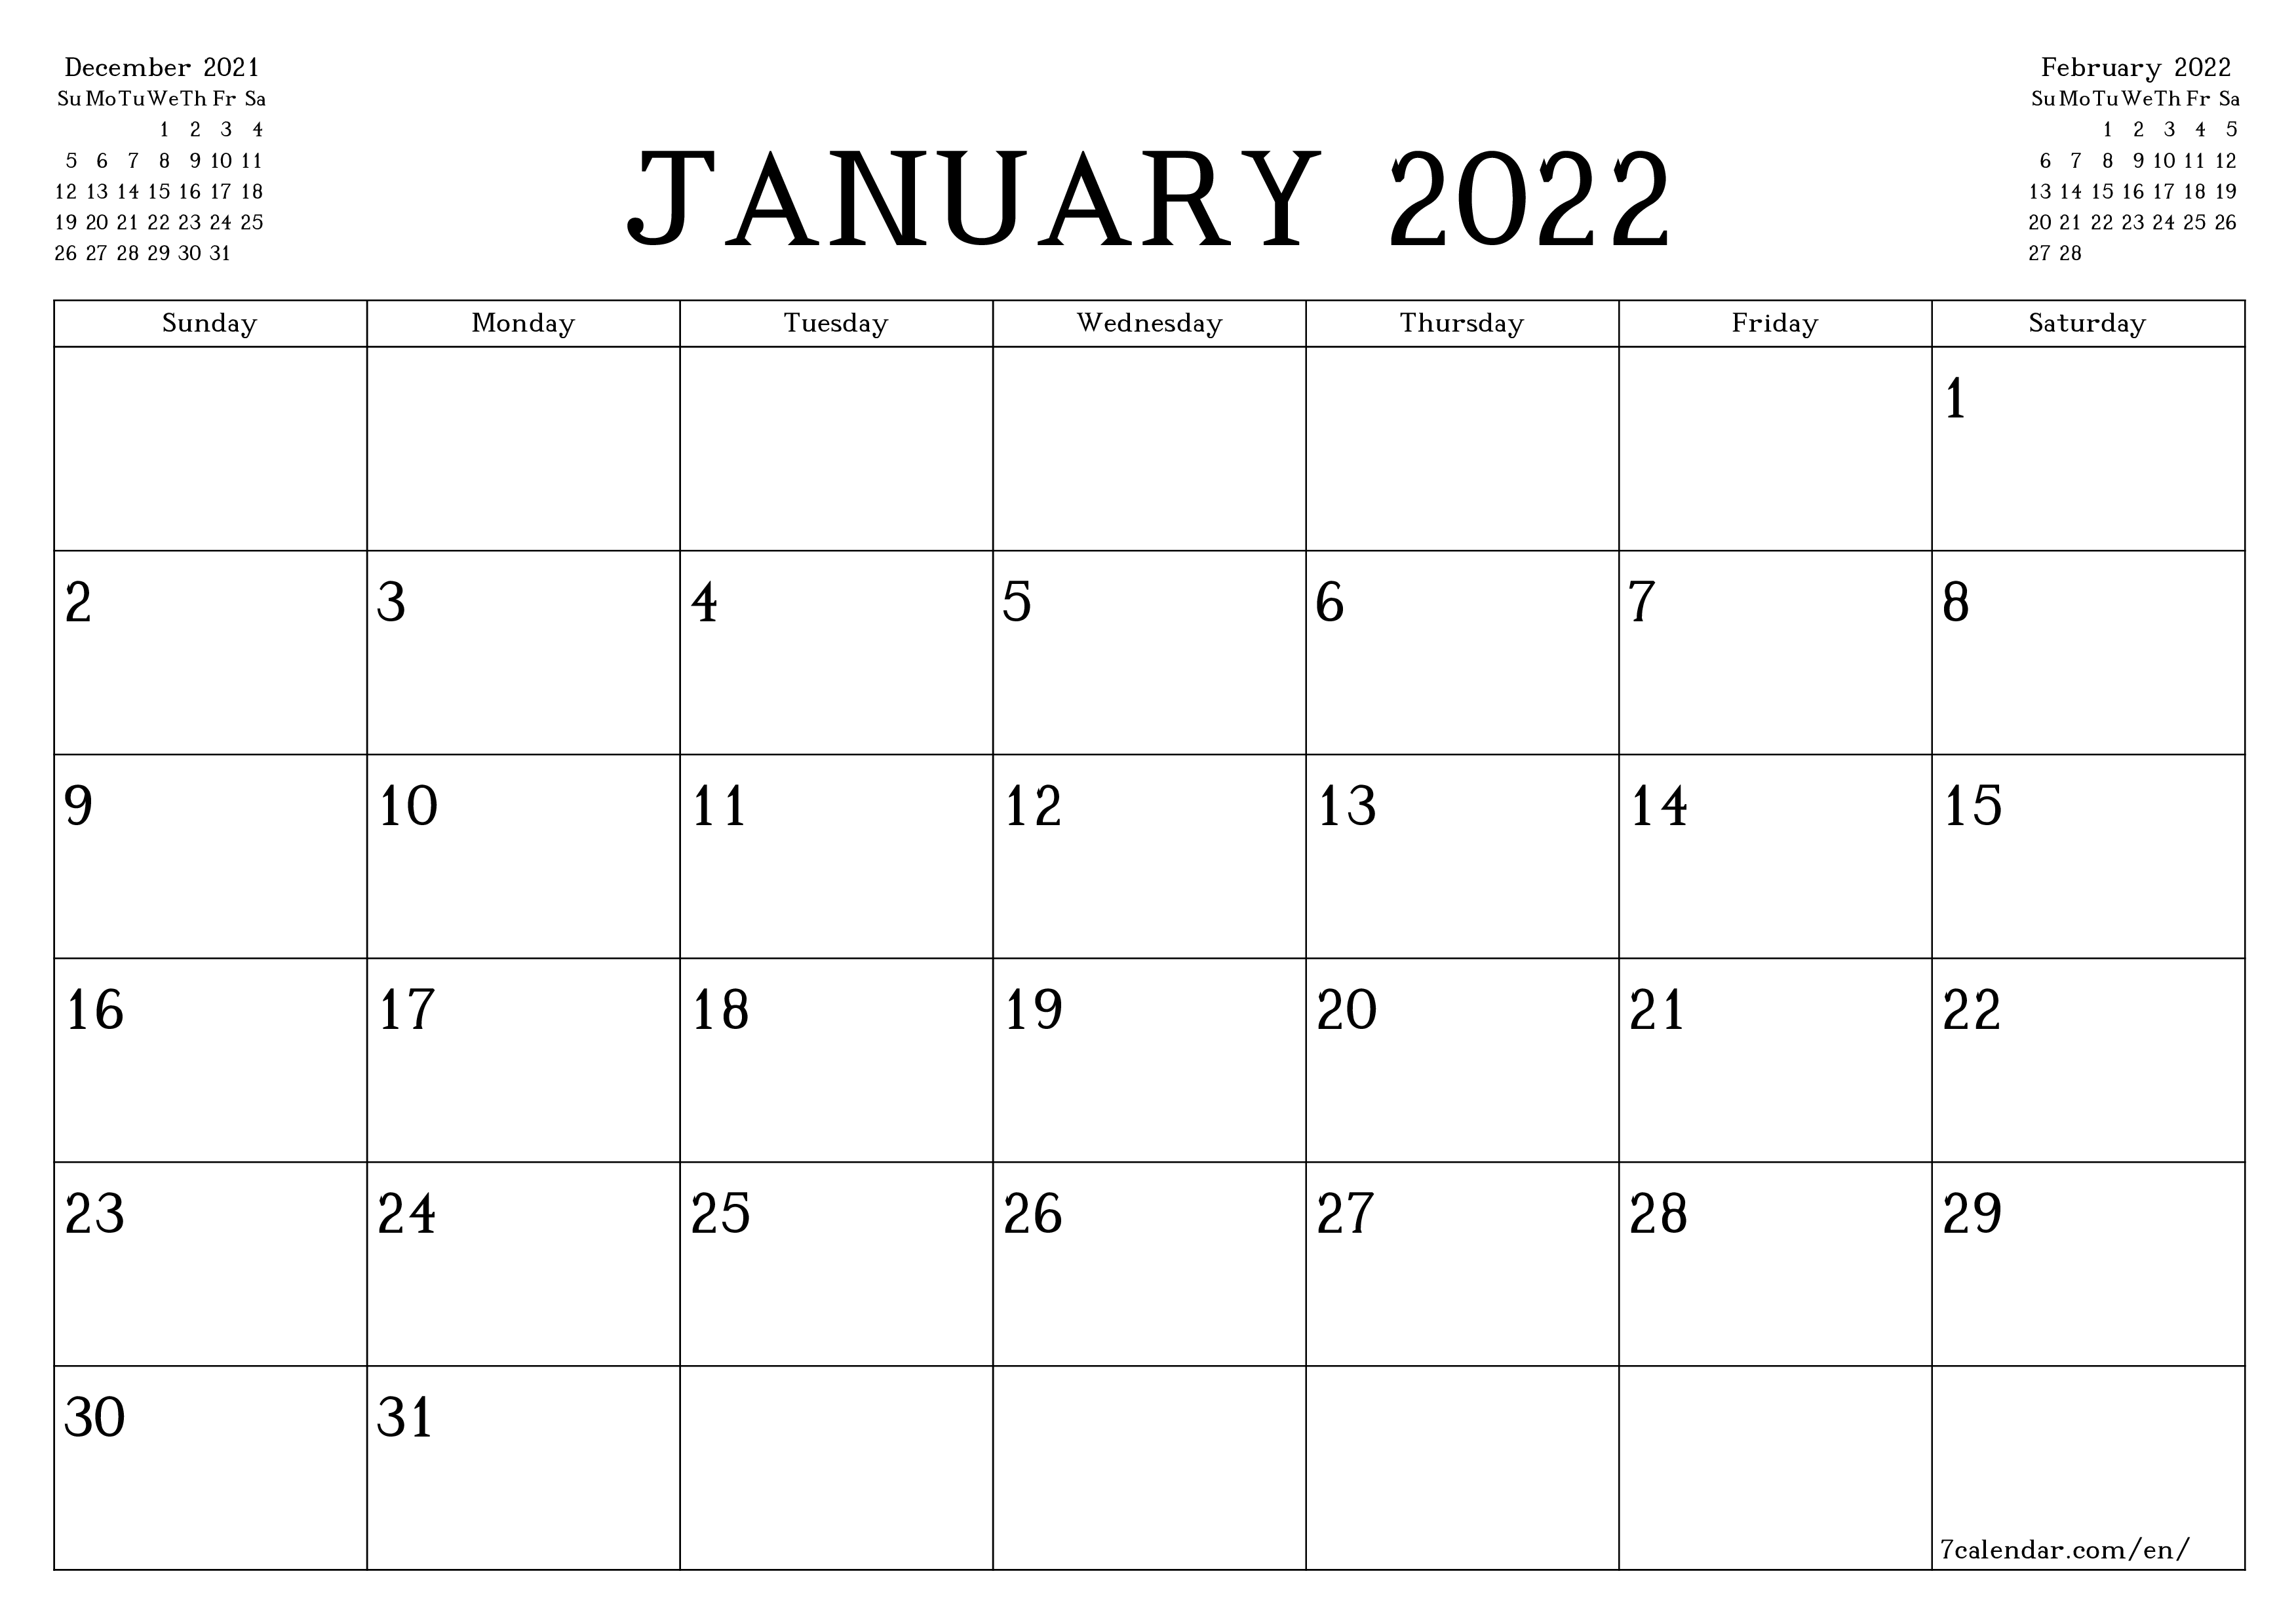 Blank monthly calendar planner for month January 2022 with notes save and print to PDF PNG English - 7calendar.com